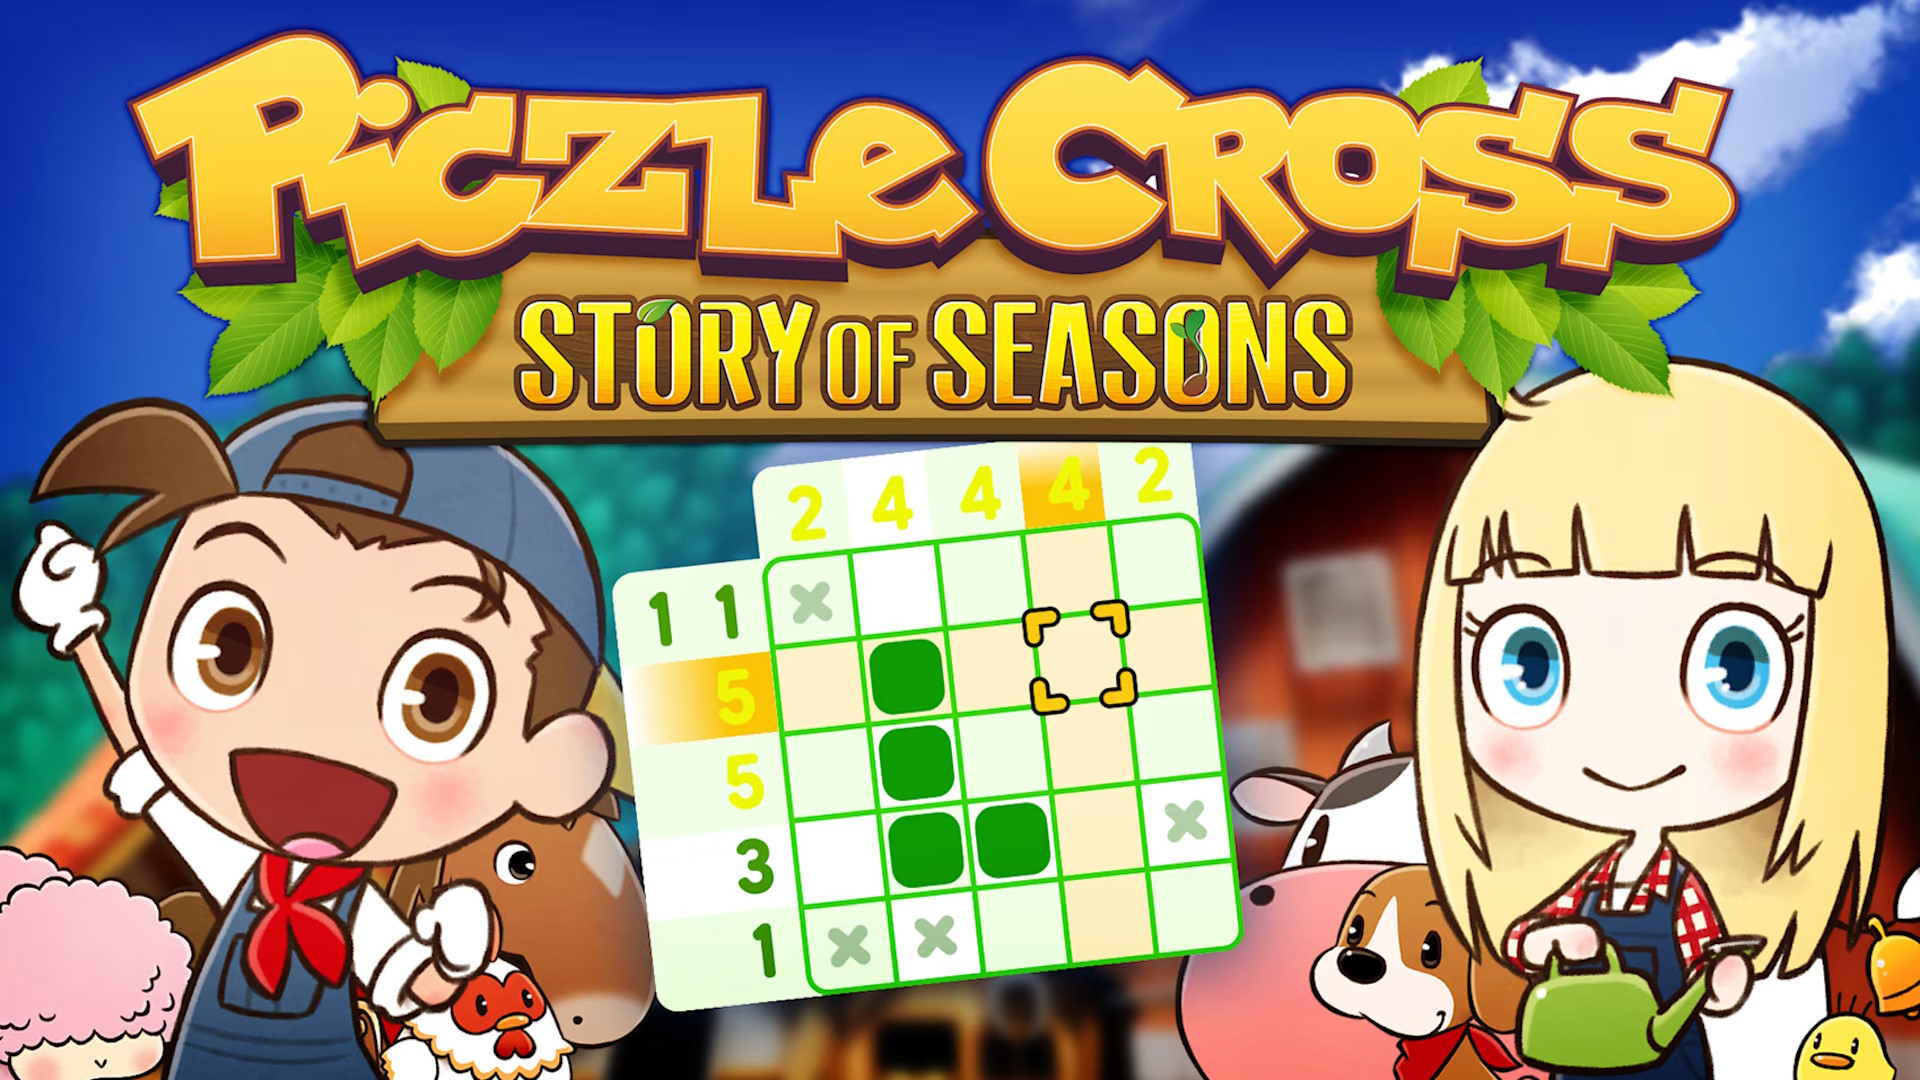  Piczle Cross Story of Seasons Review — Simple, enjoyable puzzling